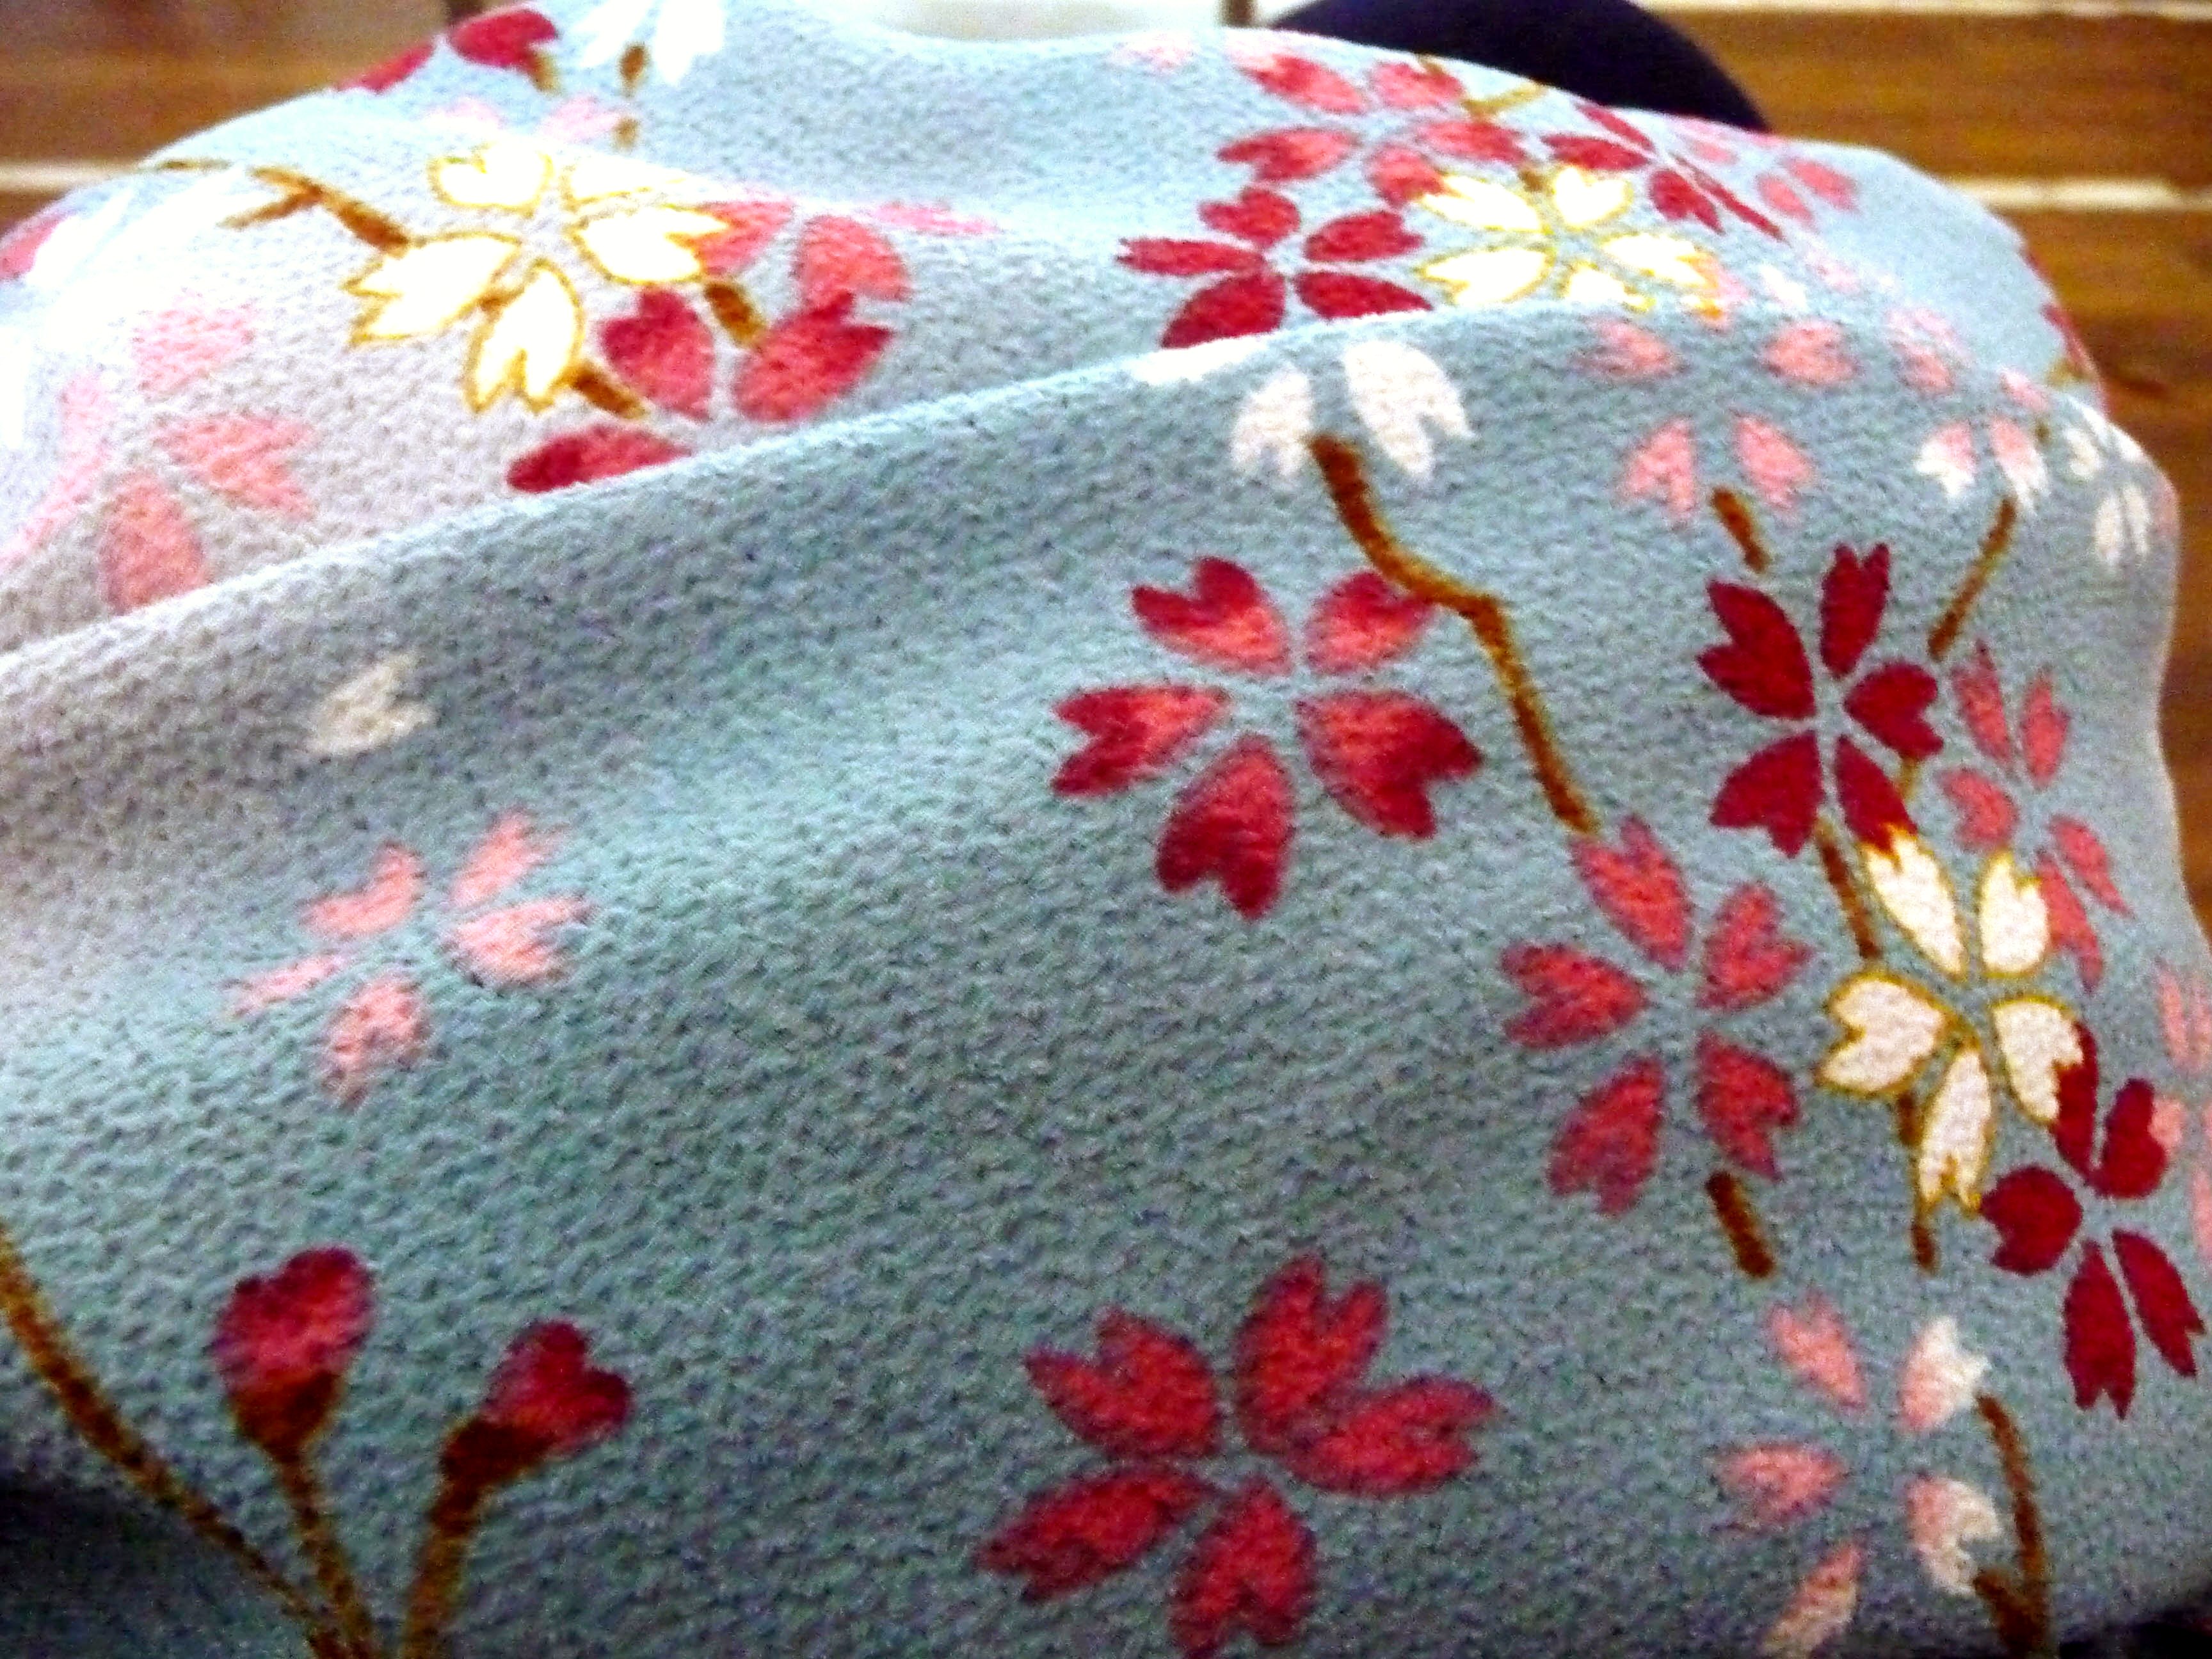 Japanese textile from Katie Chaplin's collection